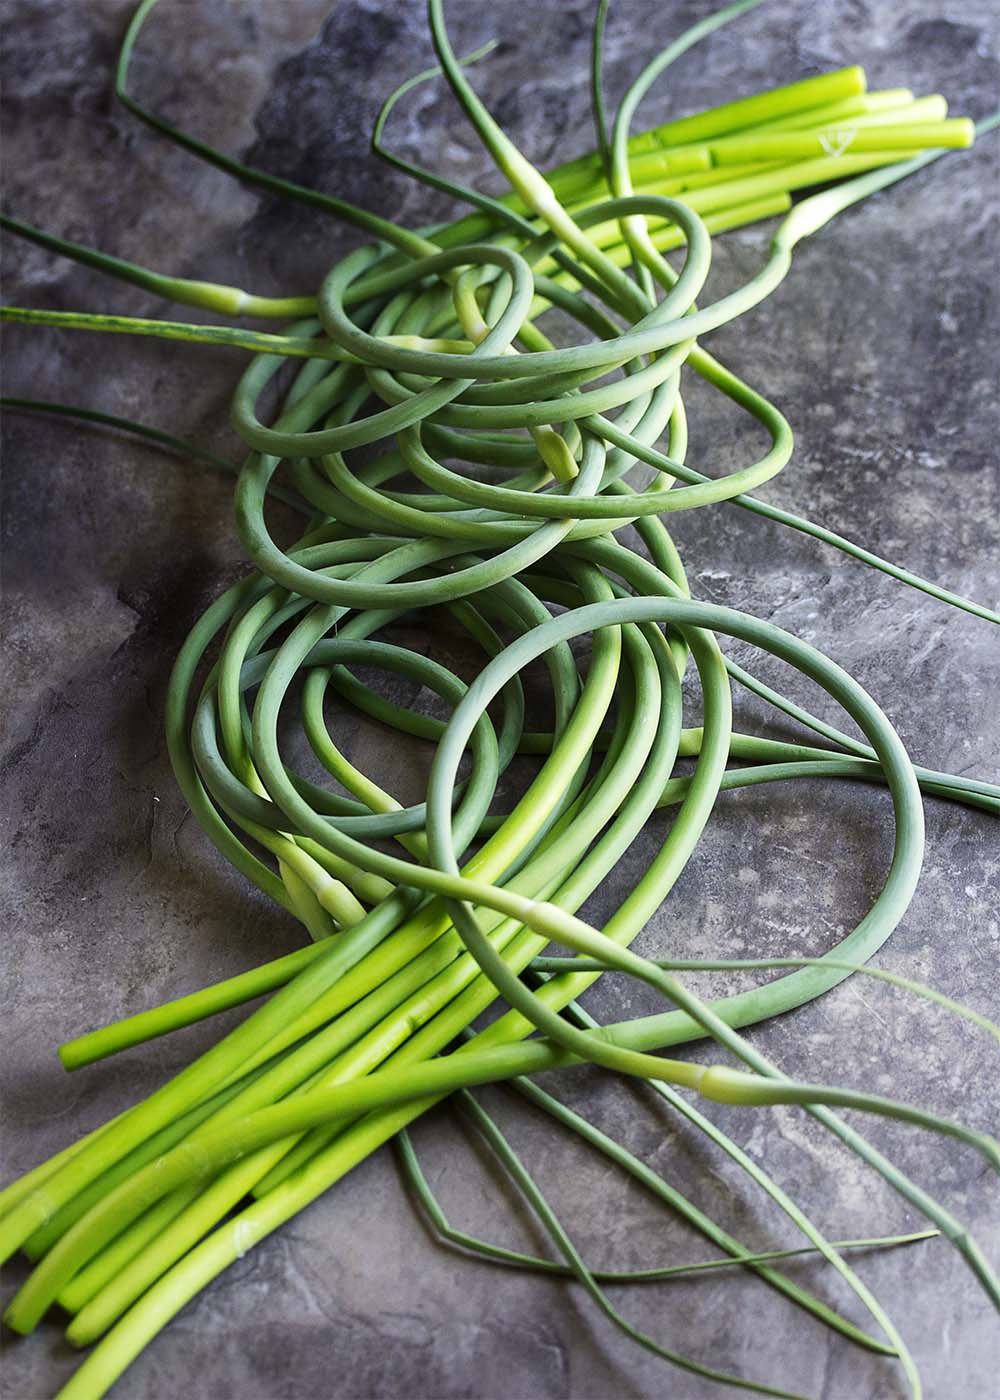 What are garlic scapes? How to use garlic scapes? How to cut and store garlic scapes? These questions and more answered in this ingredient spotlight. | justalittlebitofbacon.com